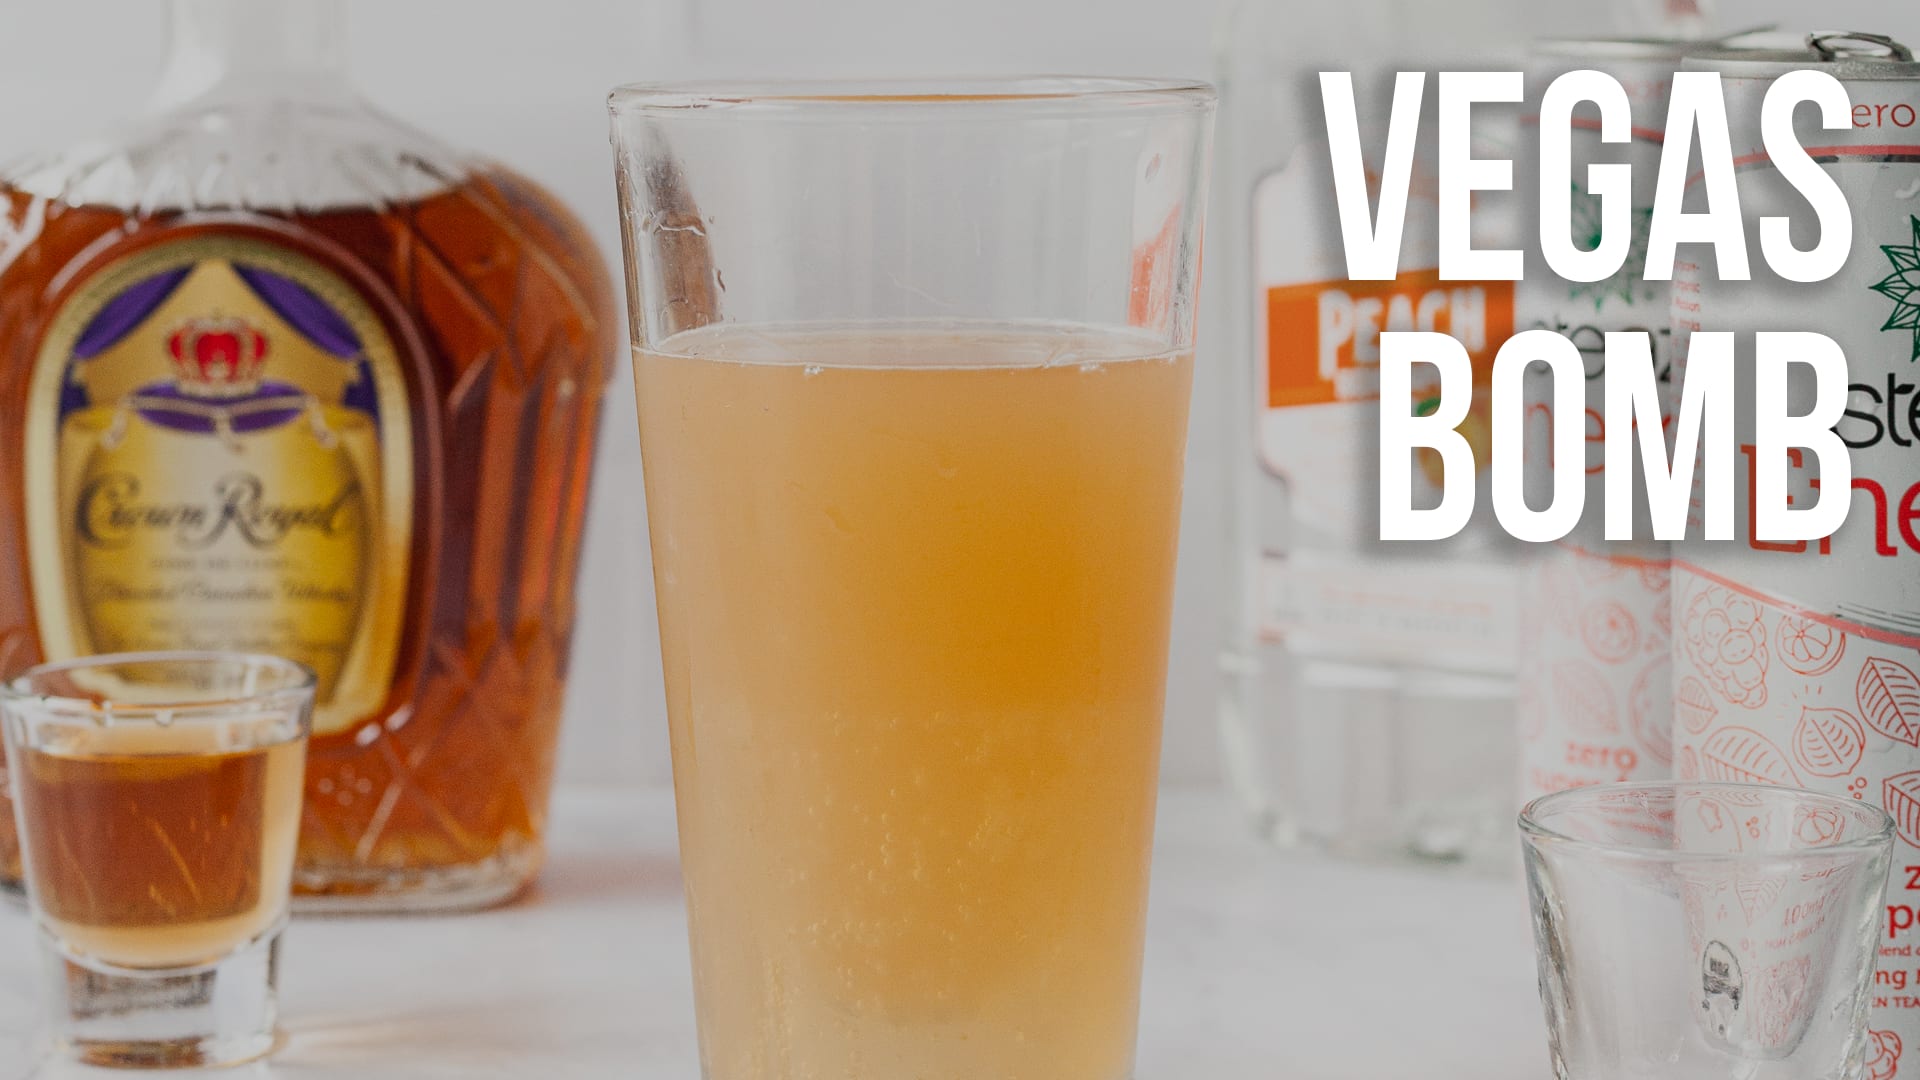 What’s in a Vegas Bomb?